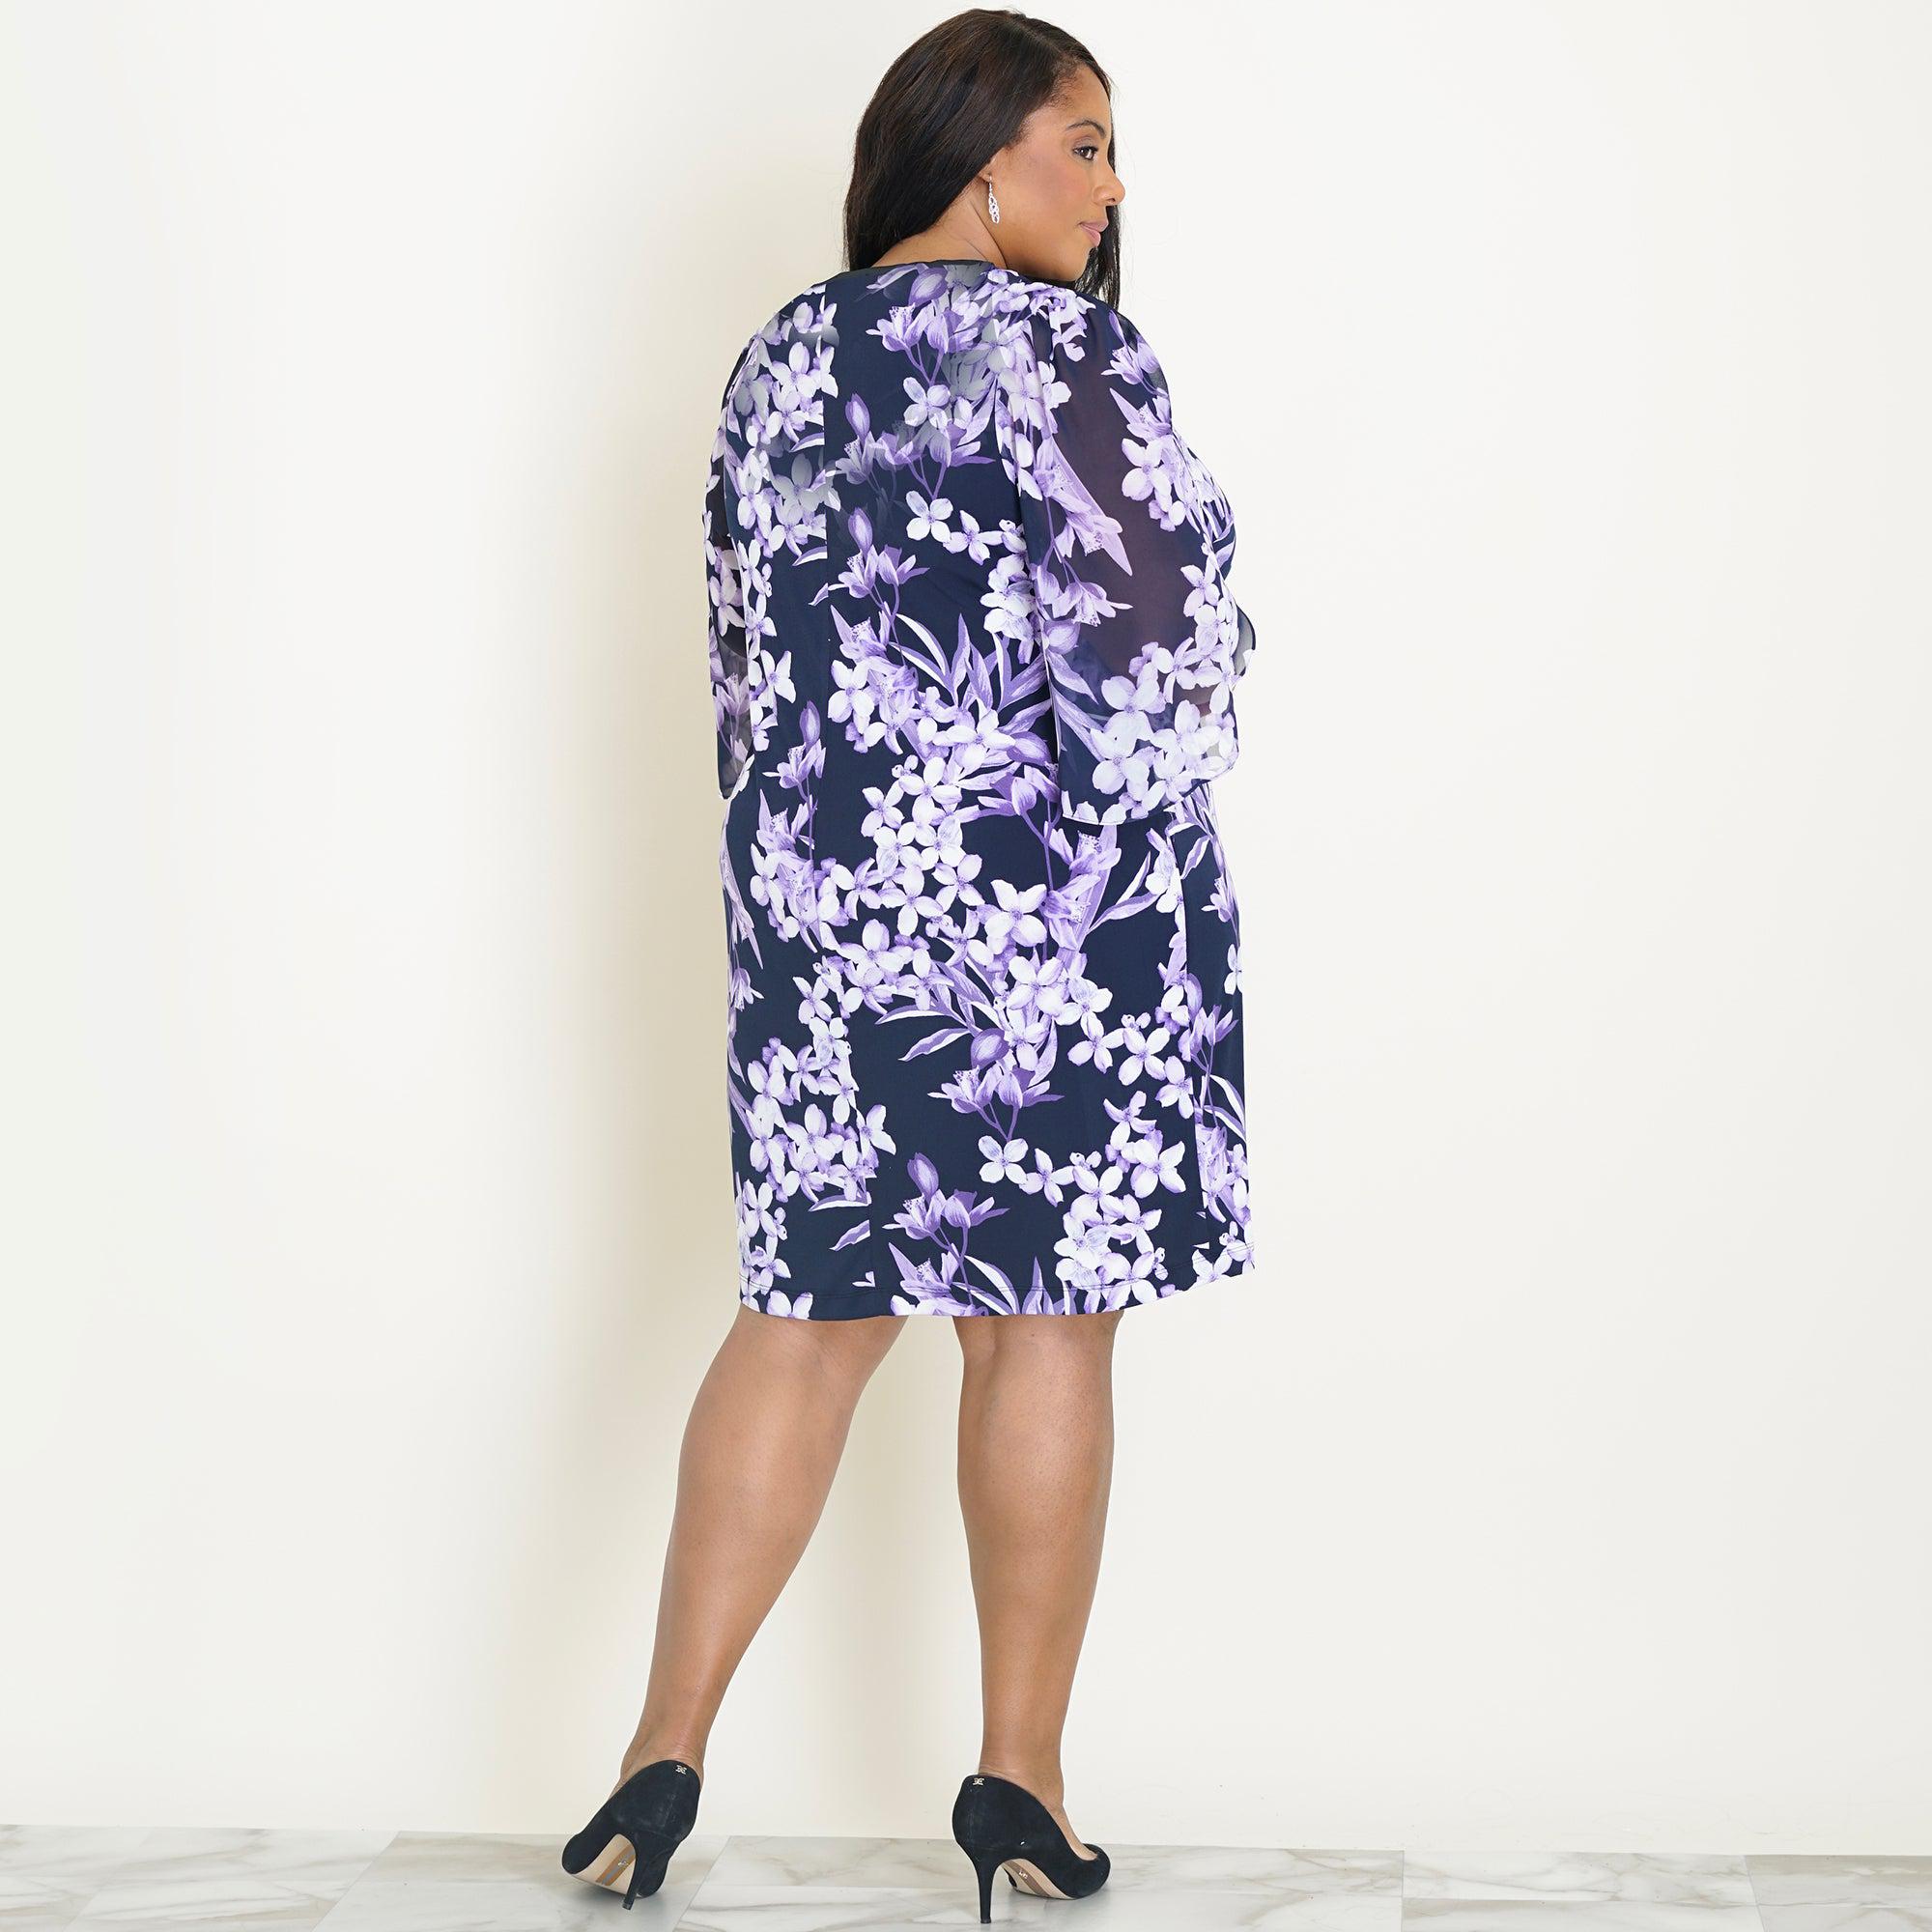 Woman posing wearing Navy/Lavender Stevie Navy and Lavender Floral Sheath Dress from Connected Apparel